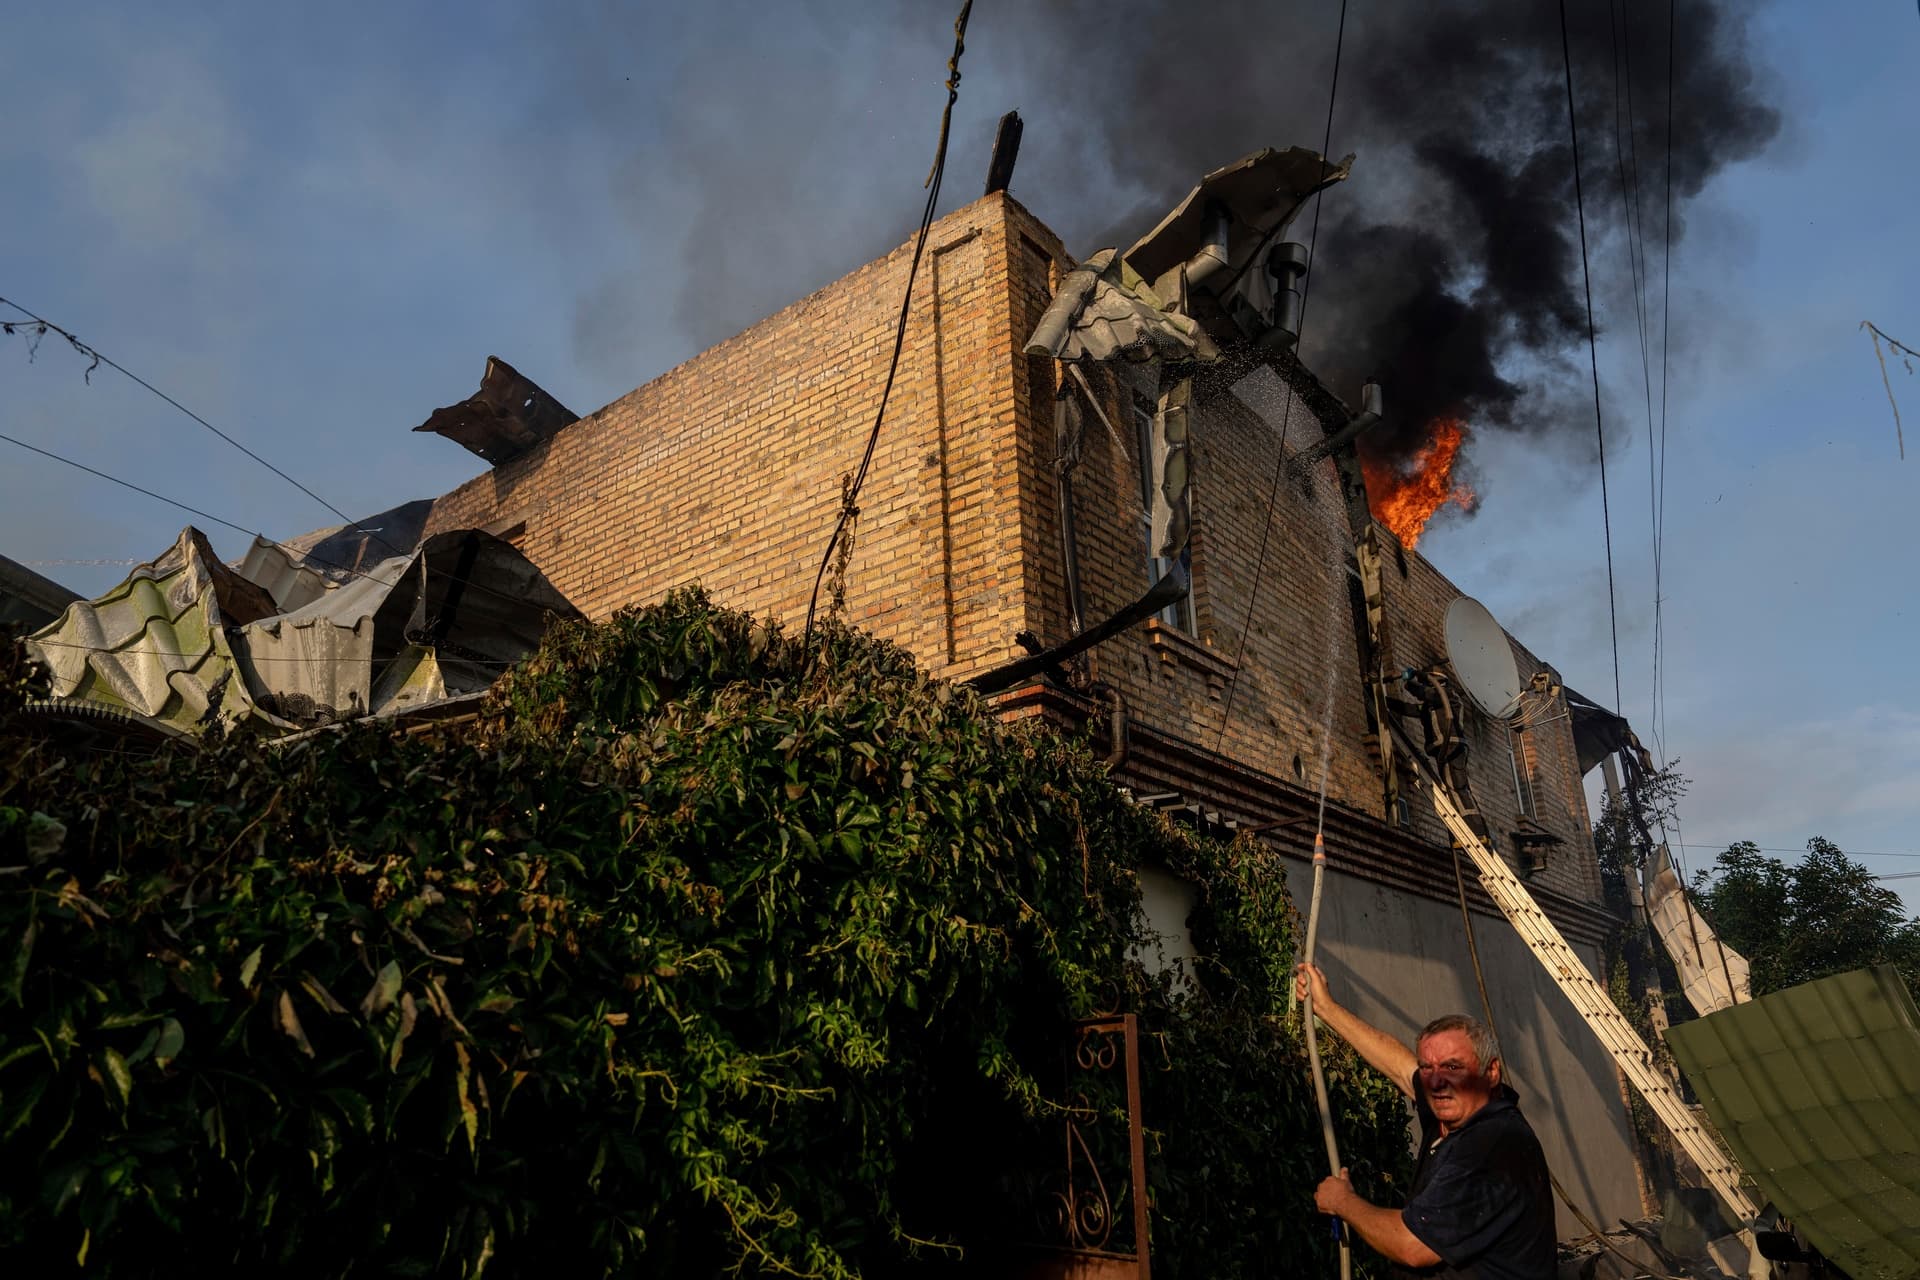 A local man extinguishing a fire of house damaged after Russian shelling in Kherson